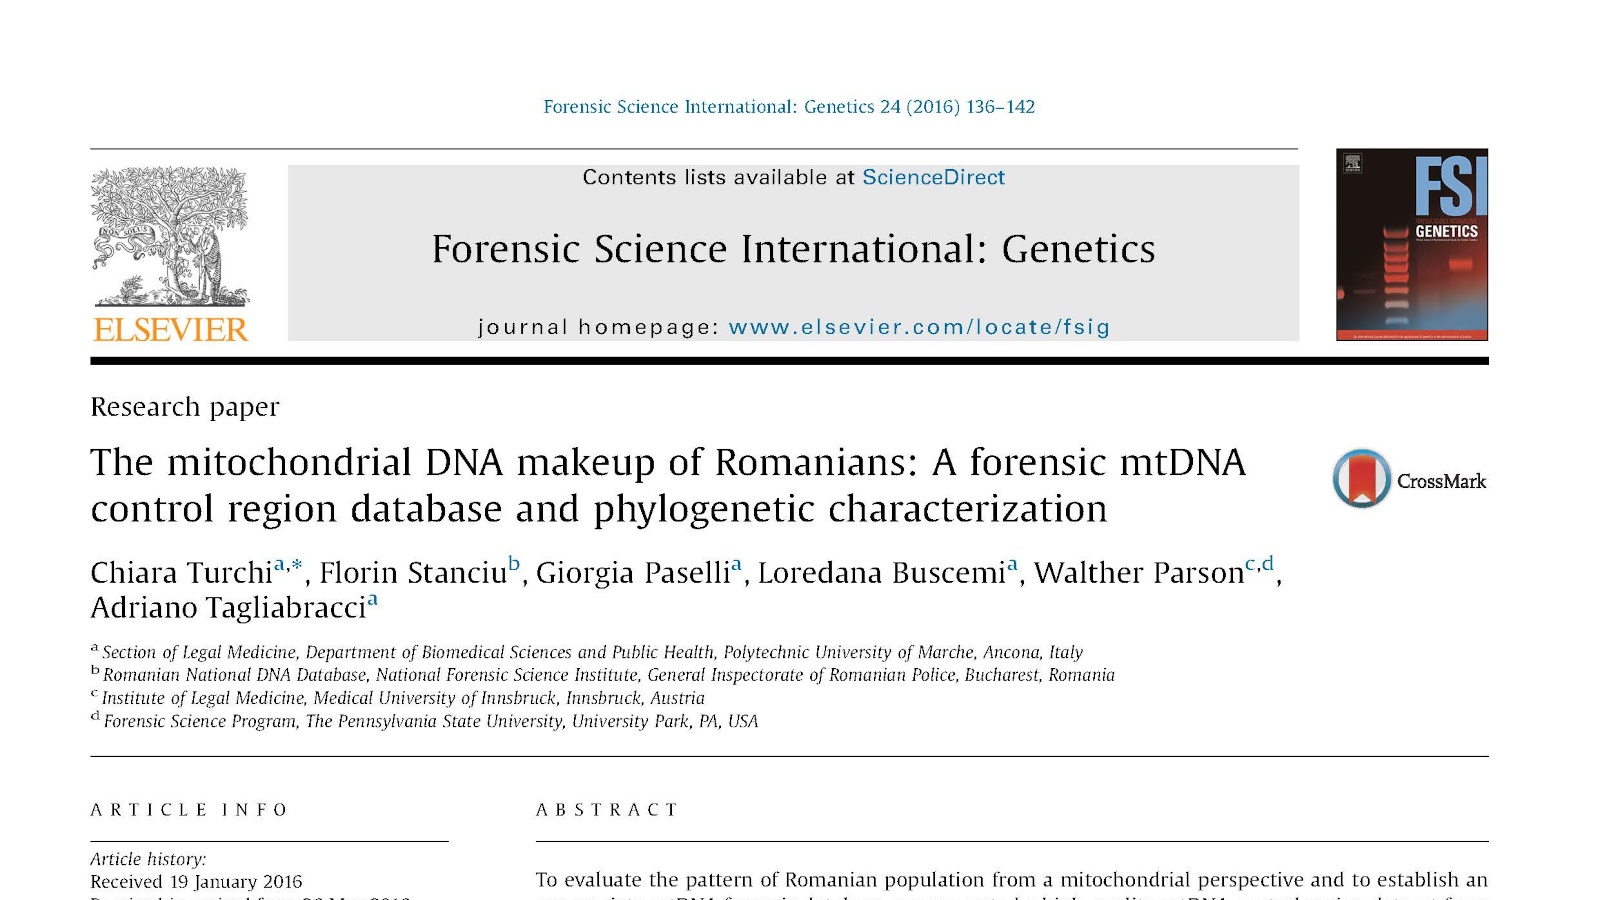 The mitochondrial DNA makeup of Romanians: A forensic mtDNA control region database and phylogenetic characterization